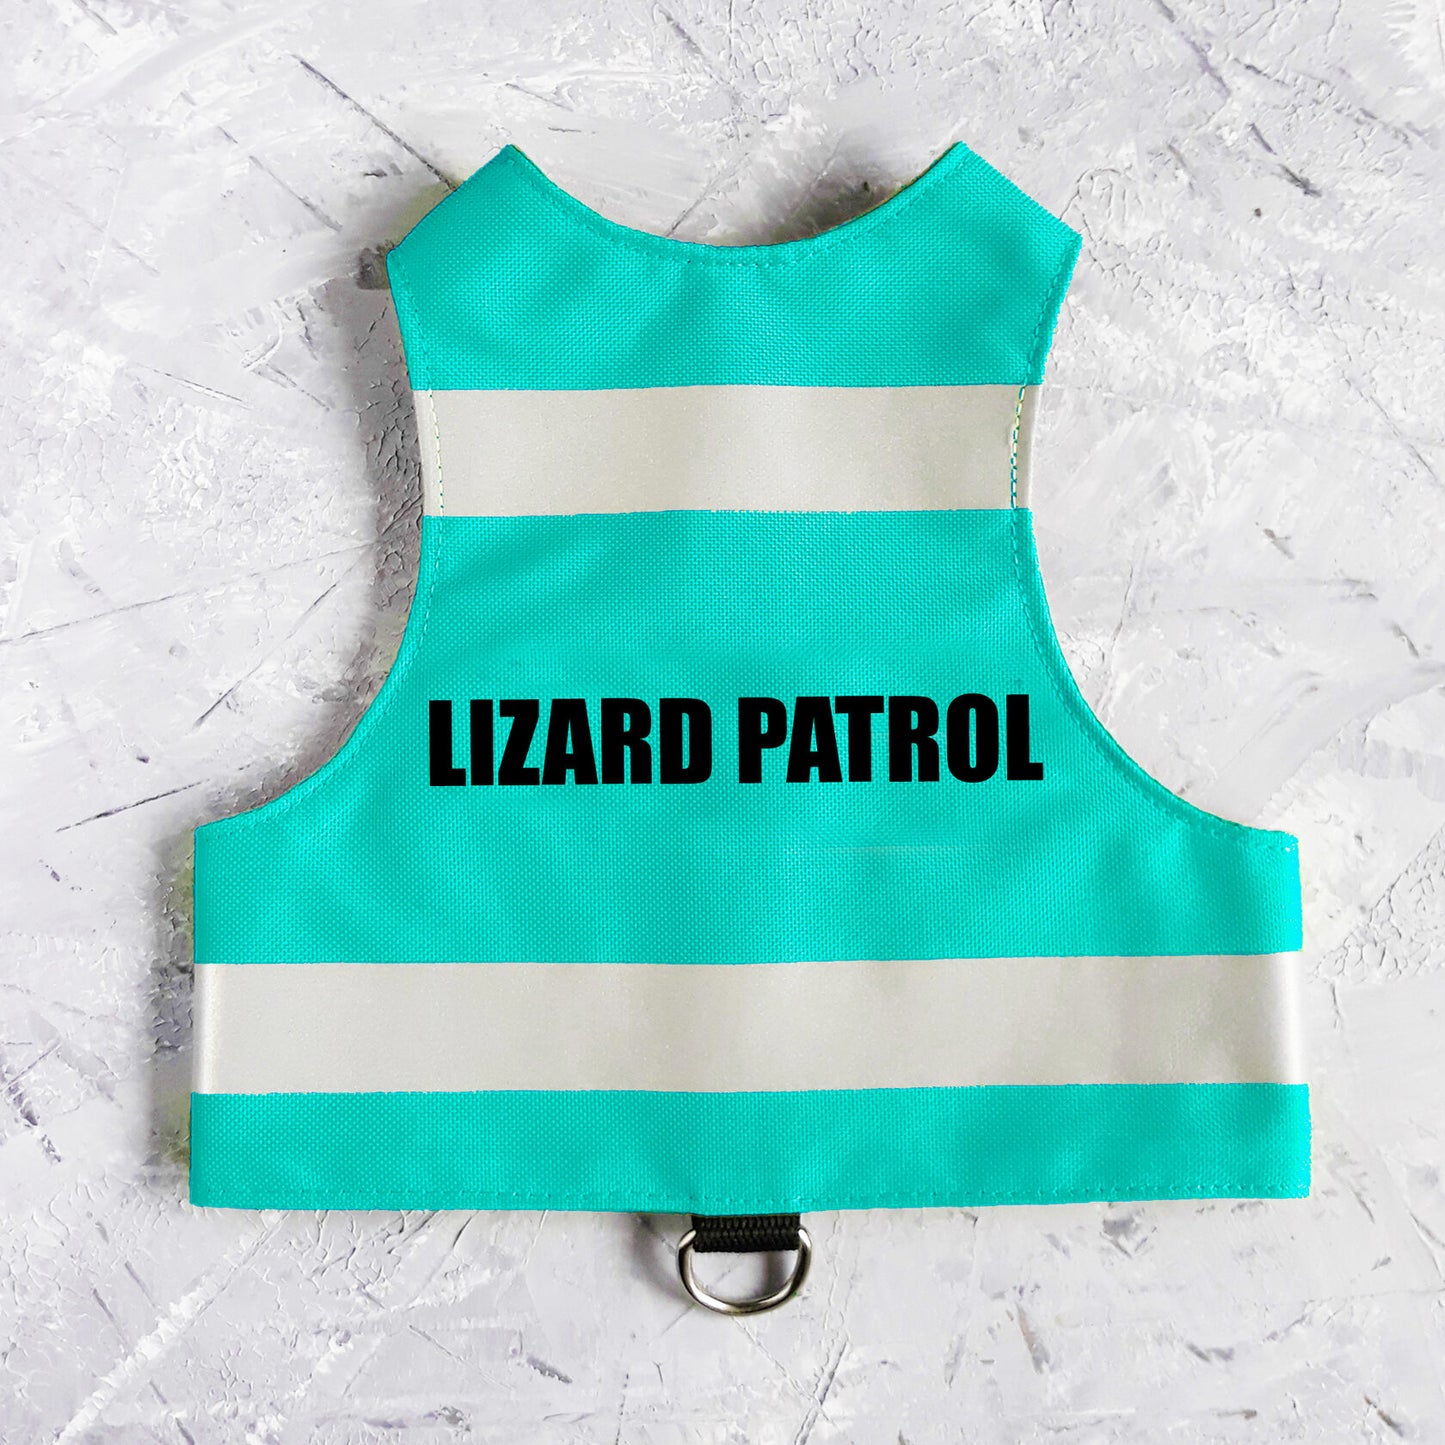 Difficult to escape water-repellent safety cat harness with reflective stripes "Lizard Patrol"